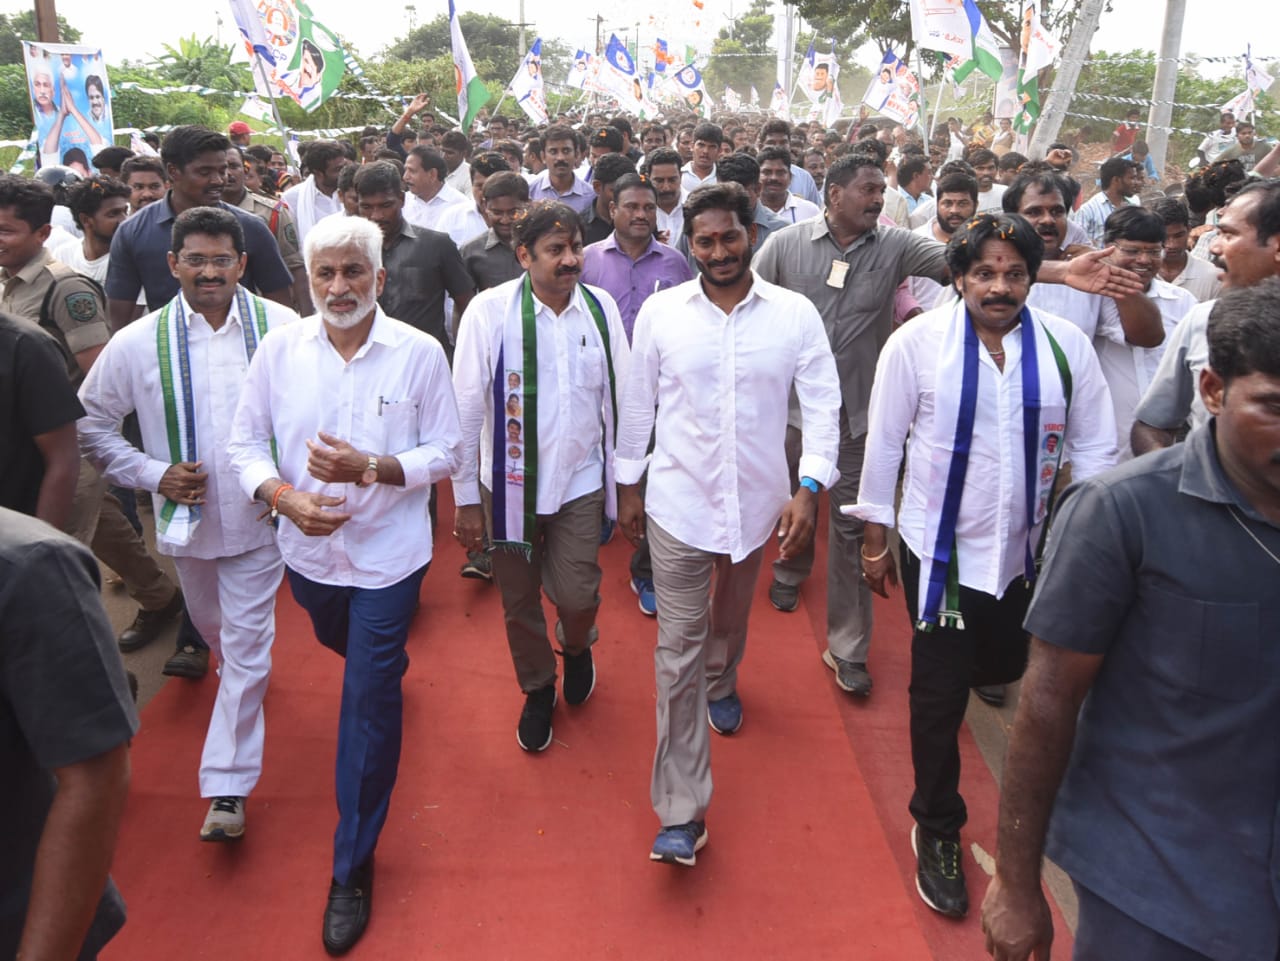 Sri YS Jagan was given a rousing welcome by the people in Visakhapatnam